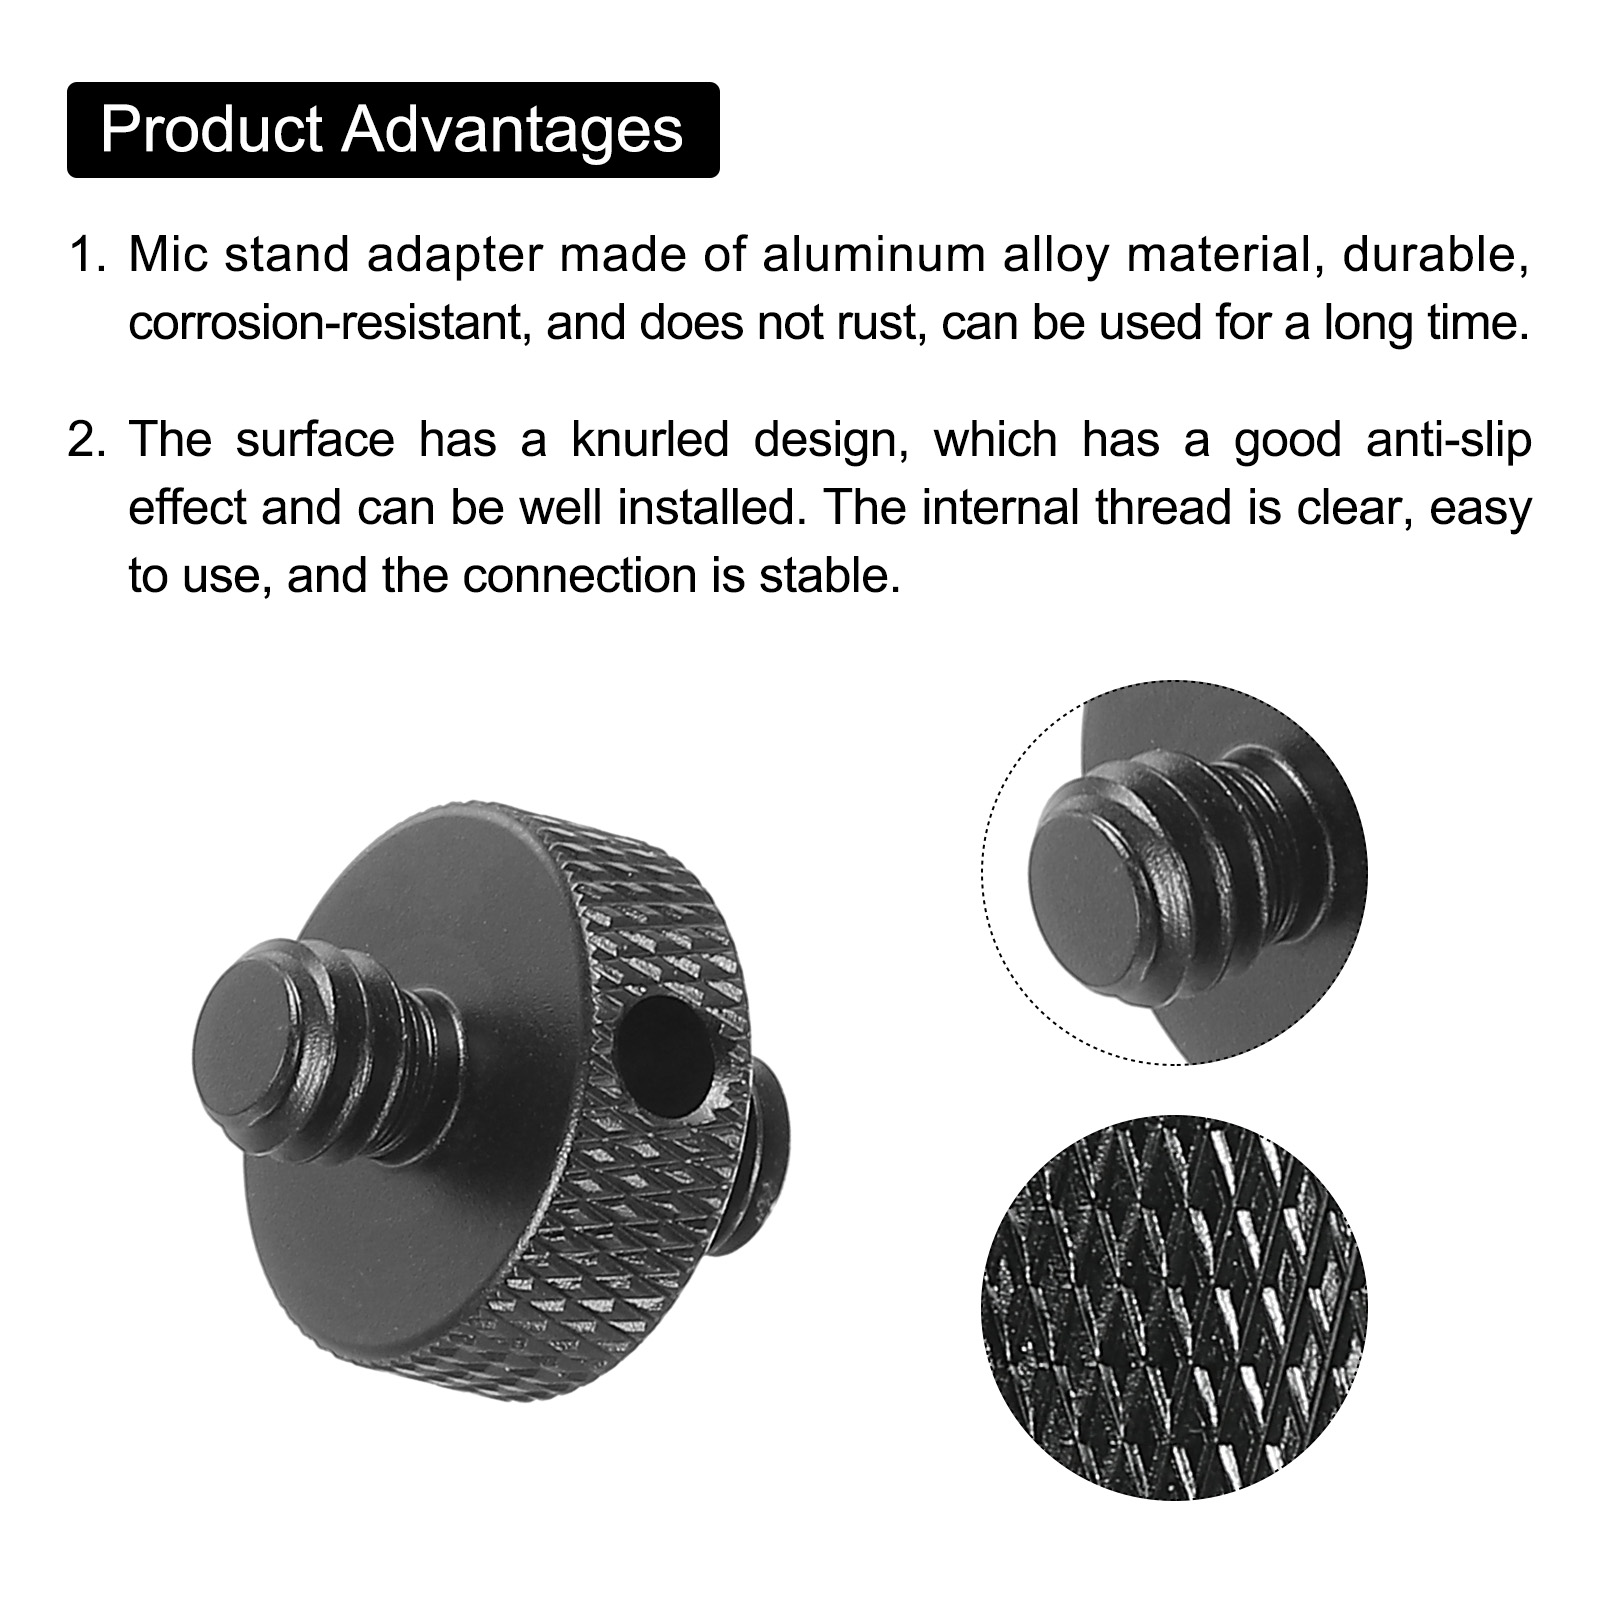 Uxcell Mic Stand Adapter 1/4 Male to 1/4 Male Thread Tripod Screw with Hole Double Sides Camera Screw Black 2 Pack - image 4 of 6